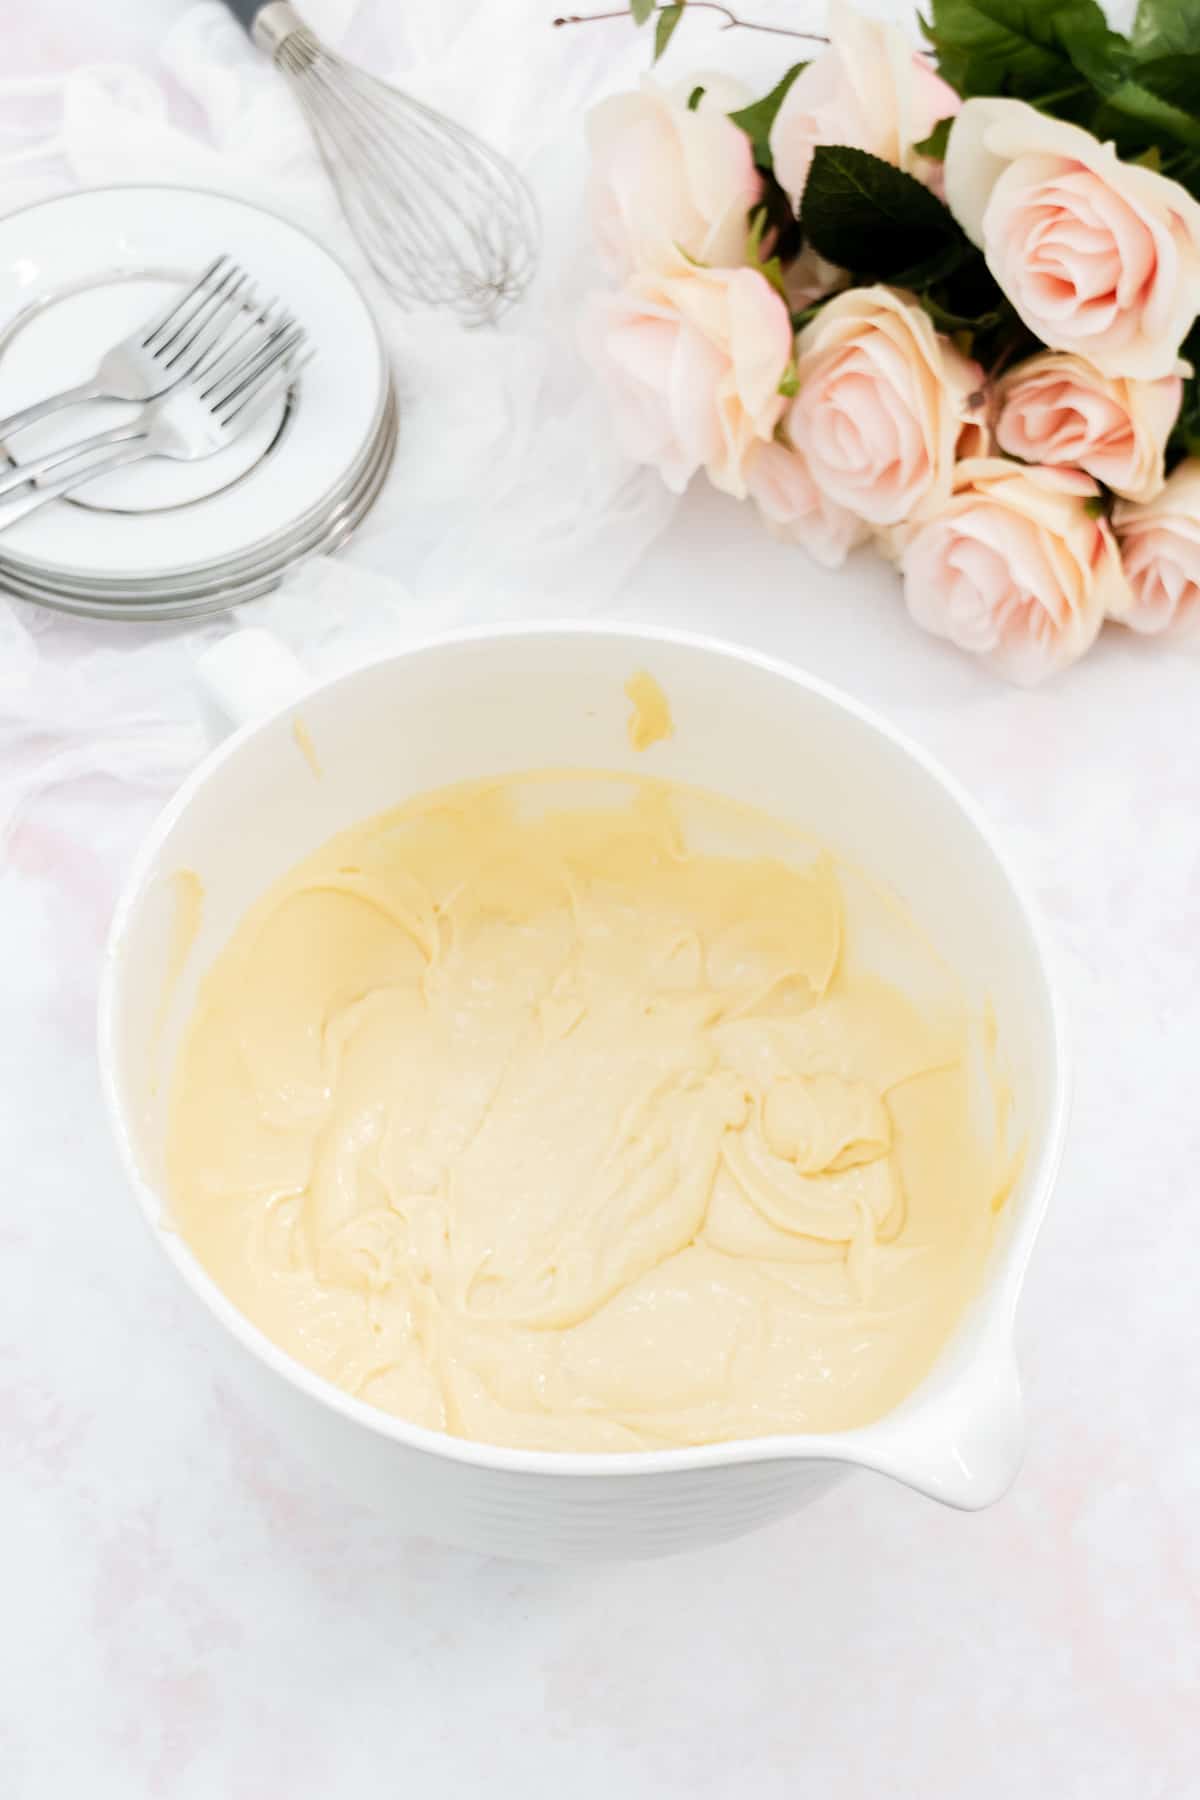 Mixed vanilla cake batter in a large white mixing bowl.